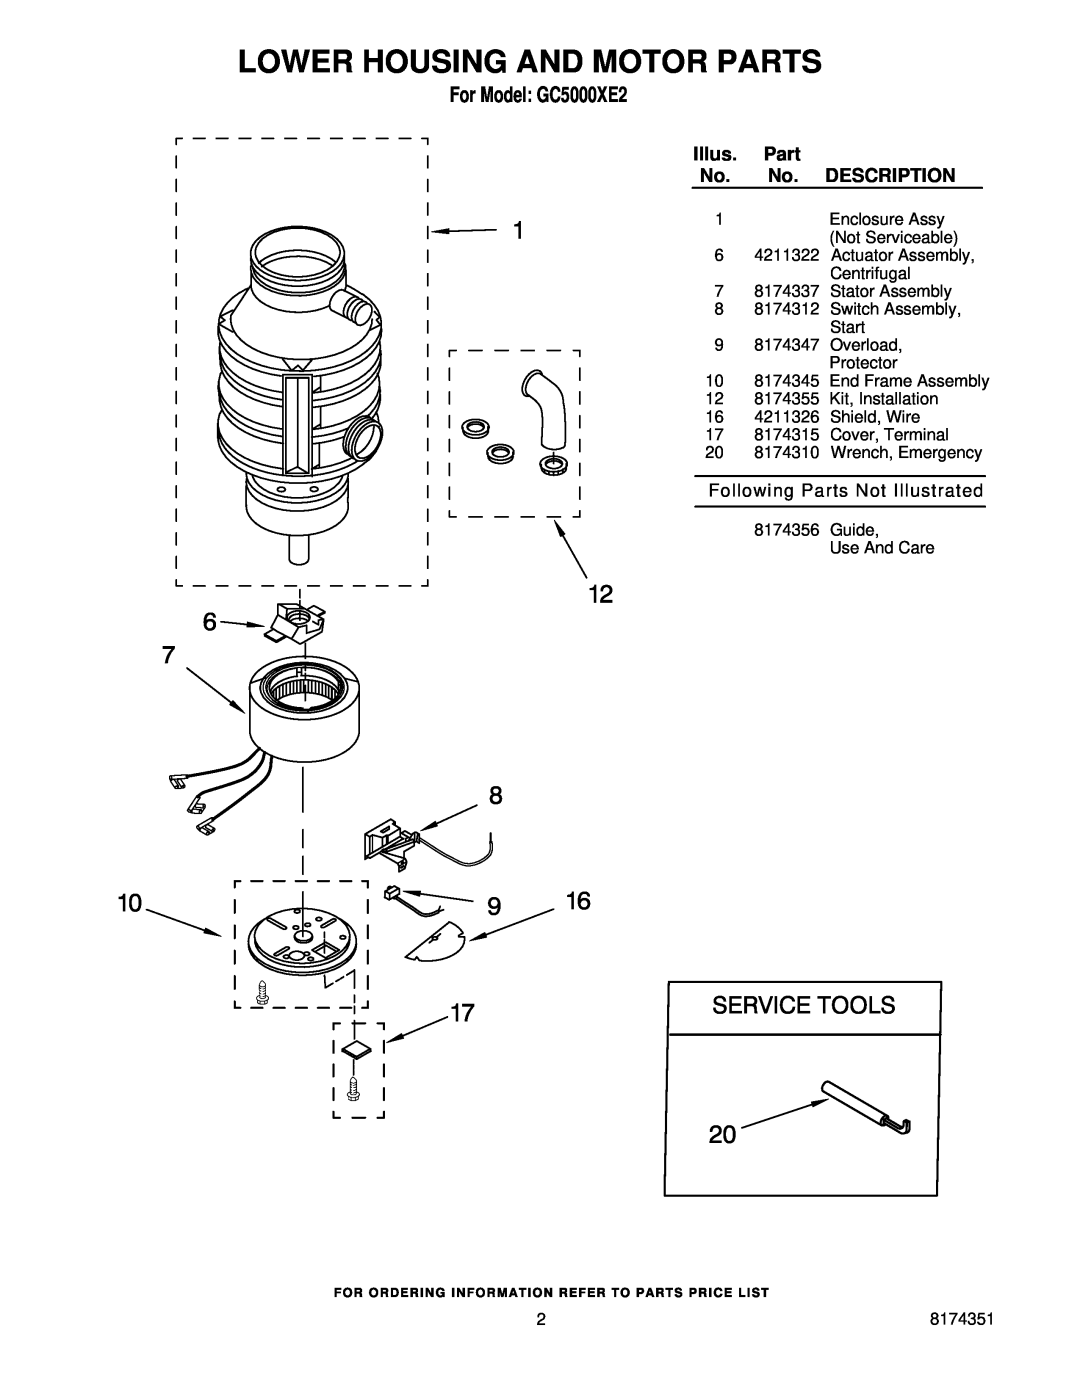 Whirlpool Description, Lower Housing And Motor Parts, For Model GC5000XE2, Following Parts Not Illustrated 